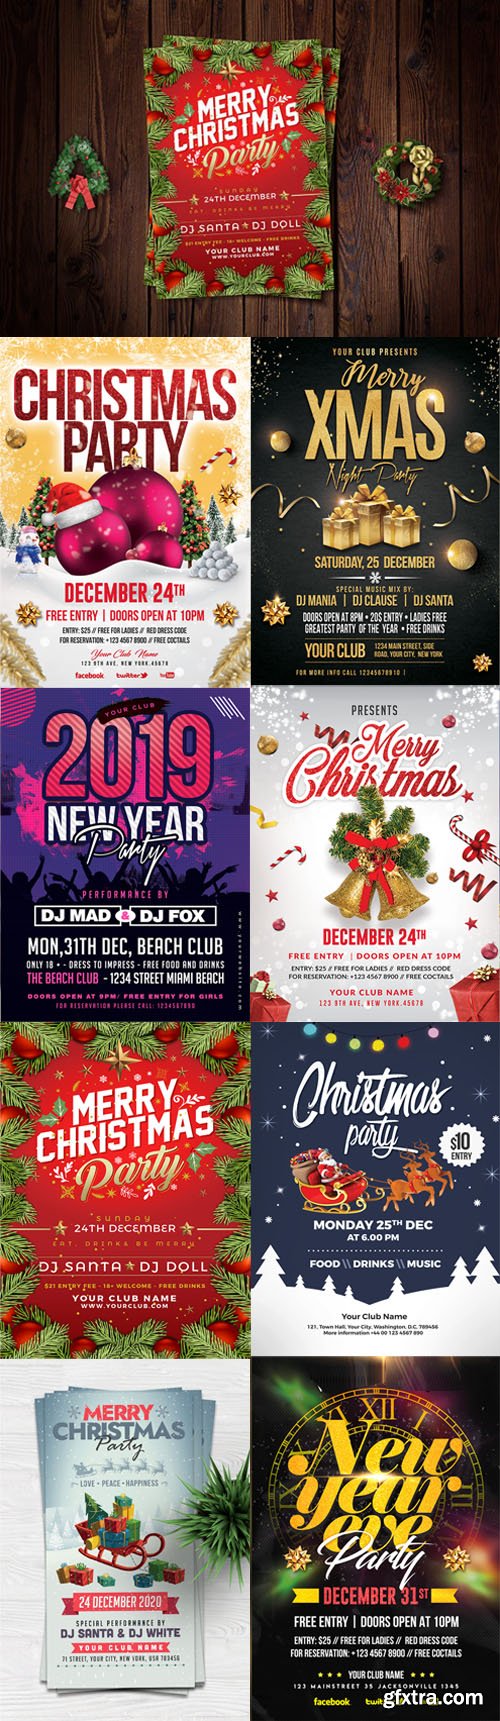 Christmas & New Year Flyers Collection 2